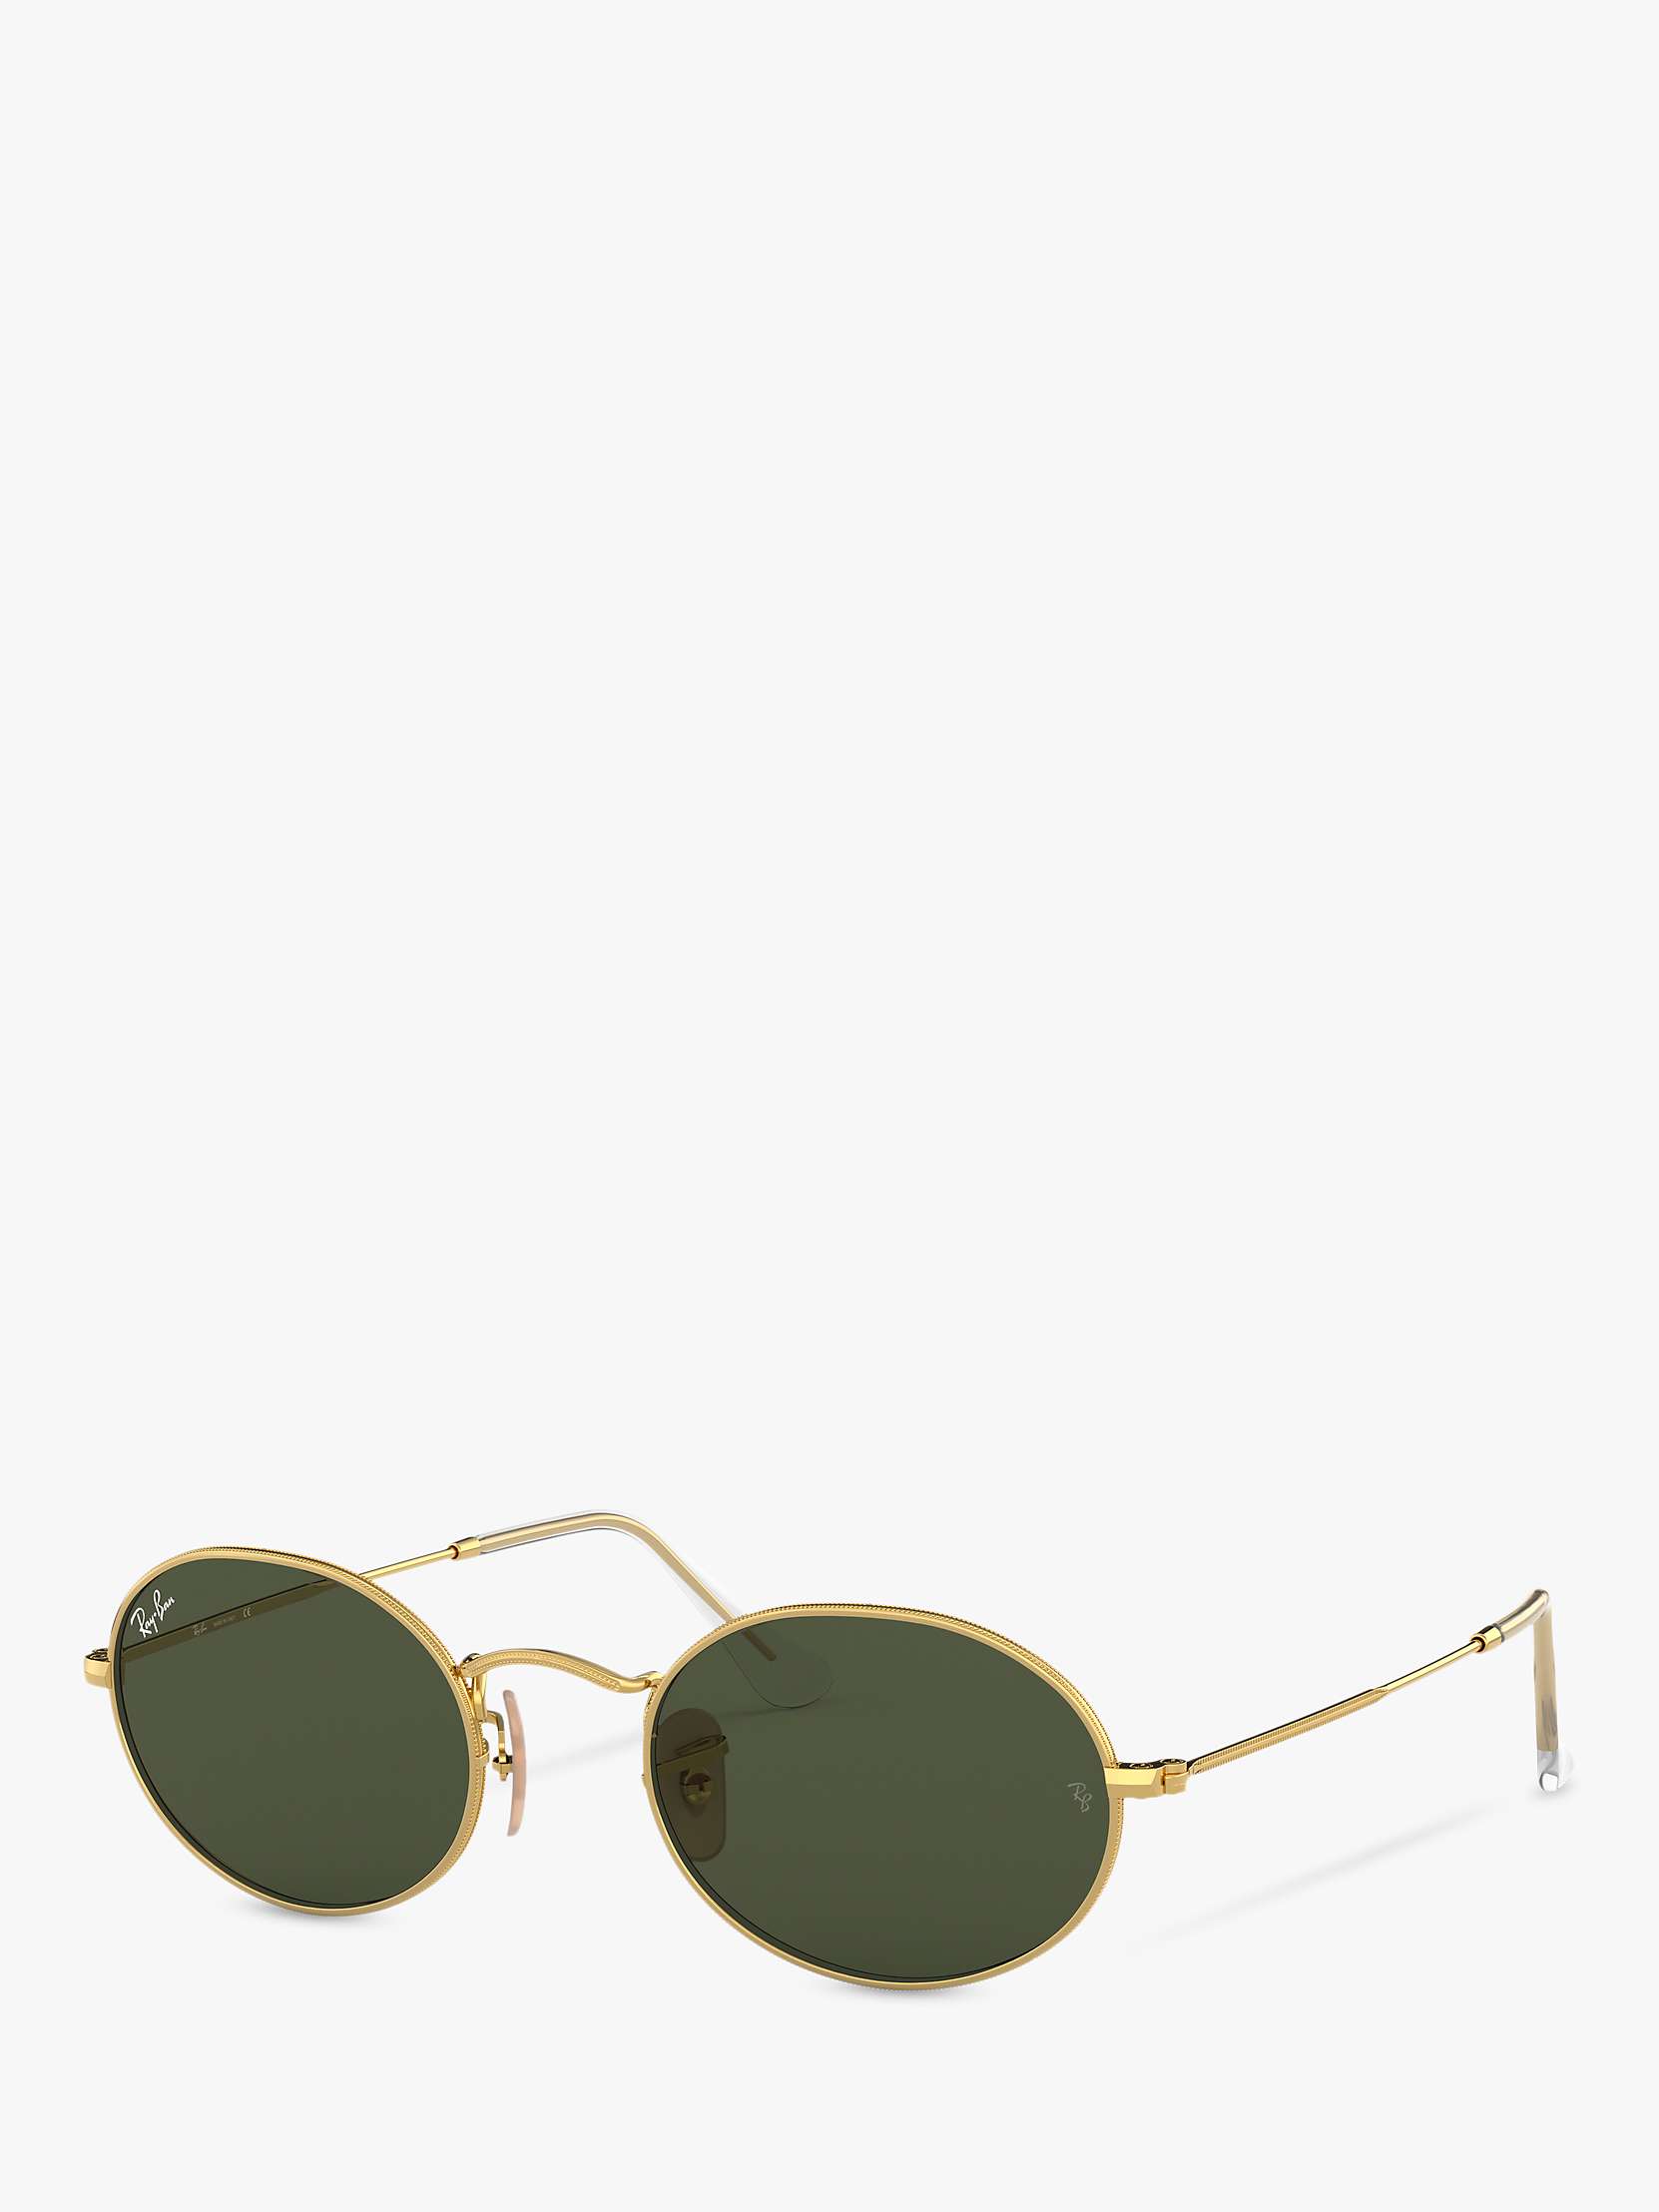 Buy Ray-Ban RB3547 Women's Oval Flat Lens Sunglasses, Gold/Green Online at johnlewis.com